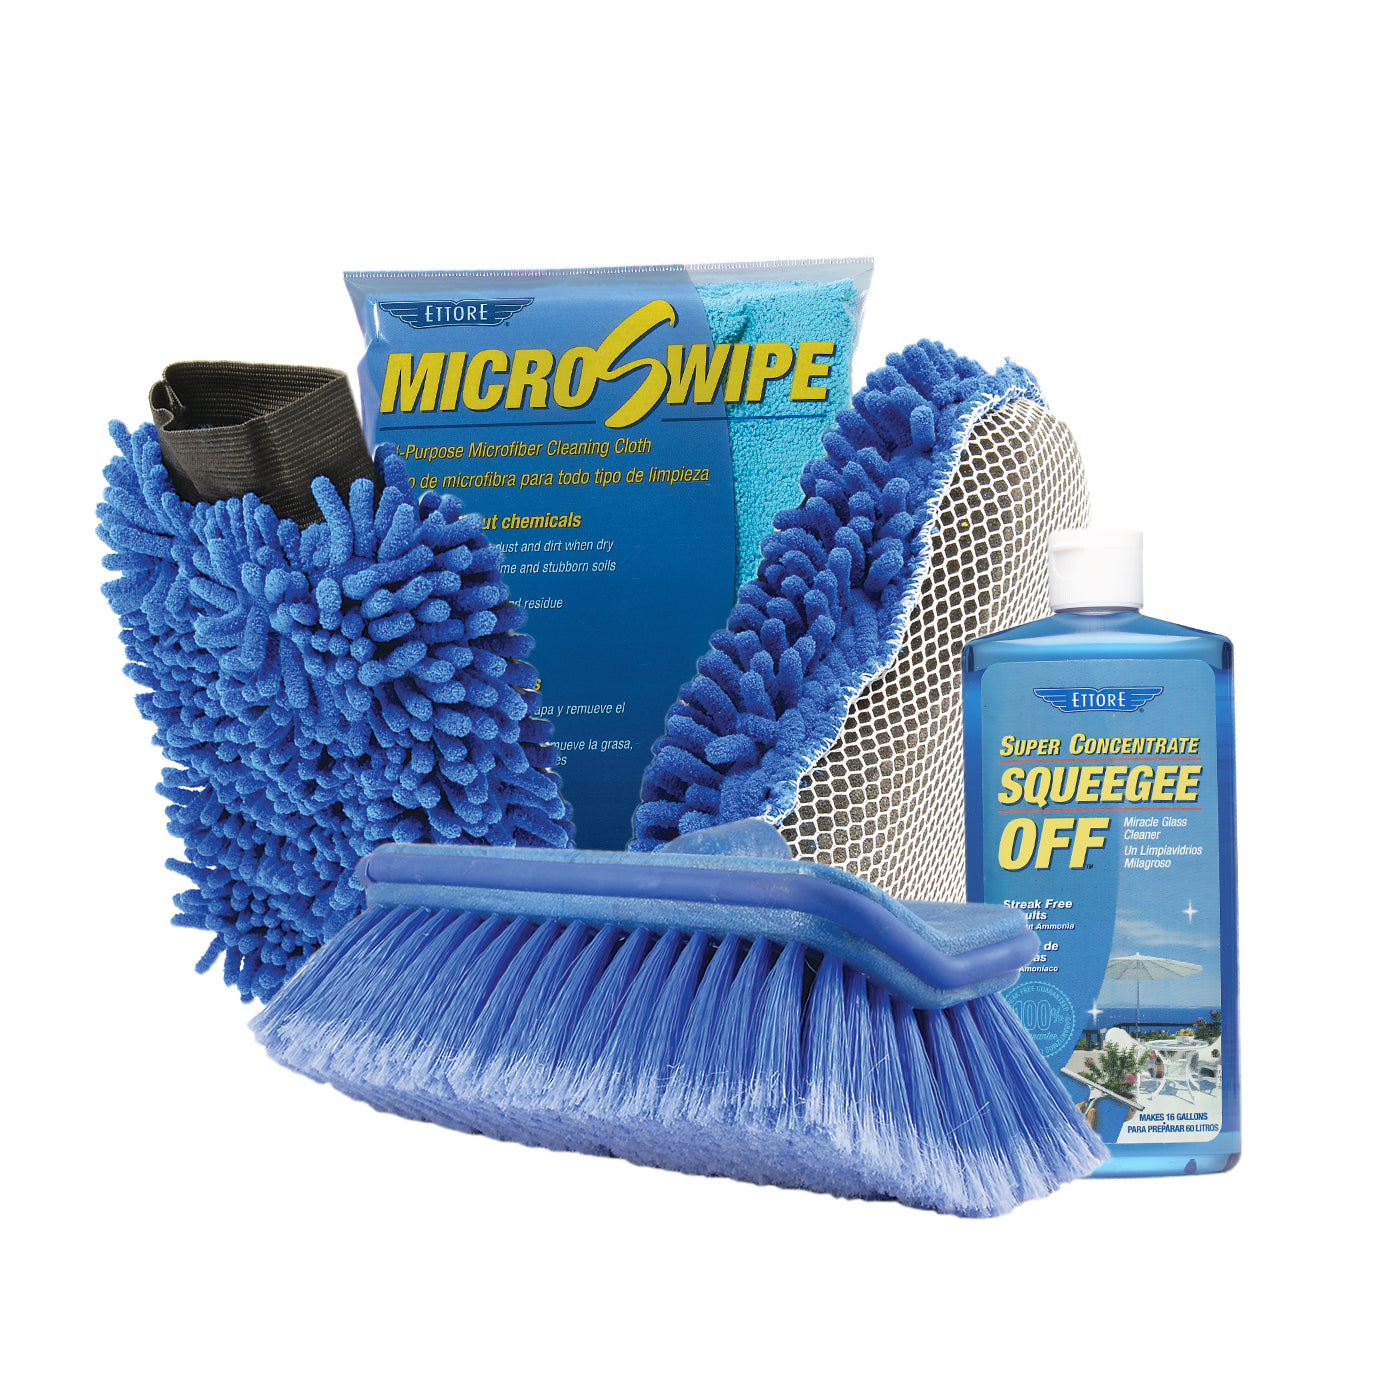 Car Wash Brushes & Squeegees